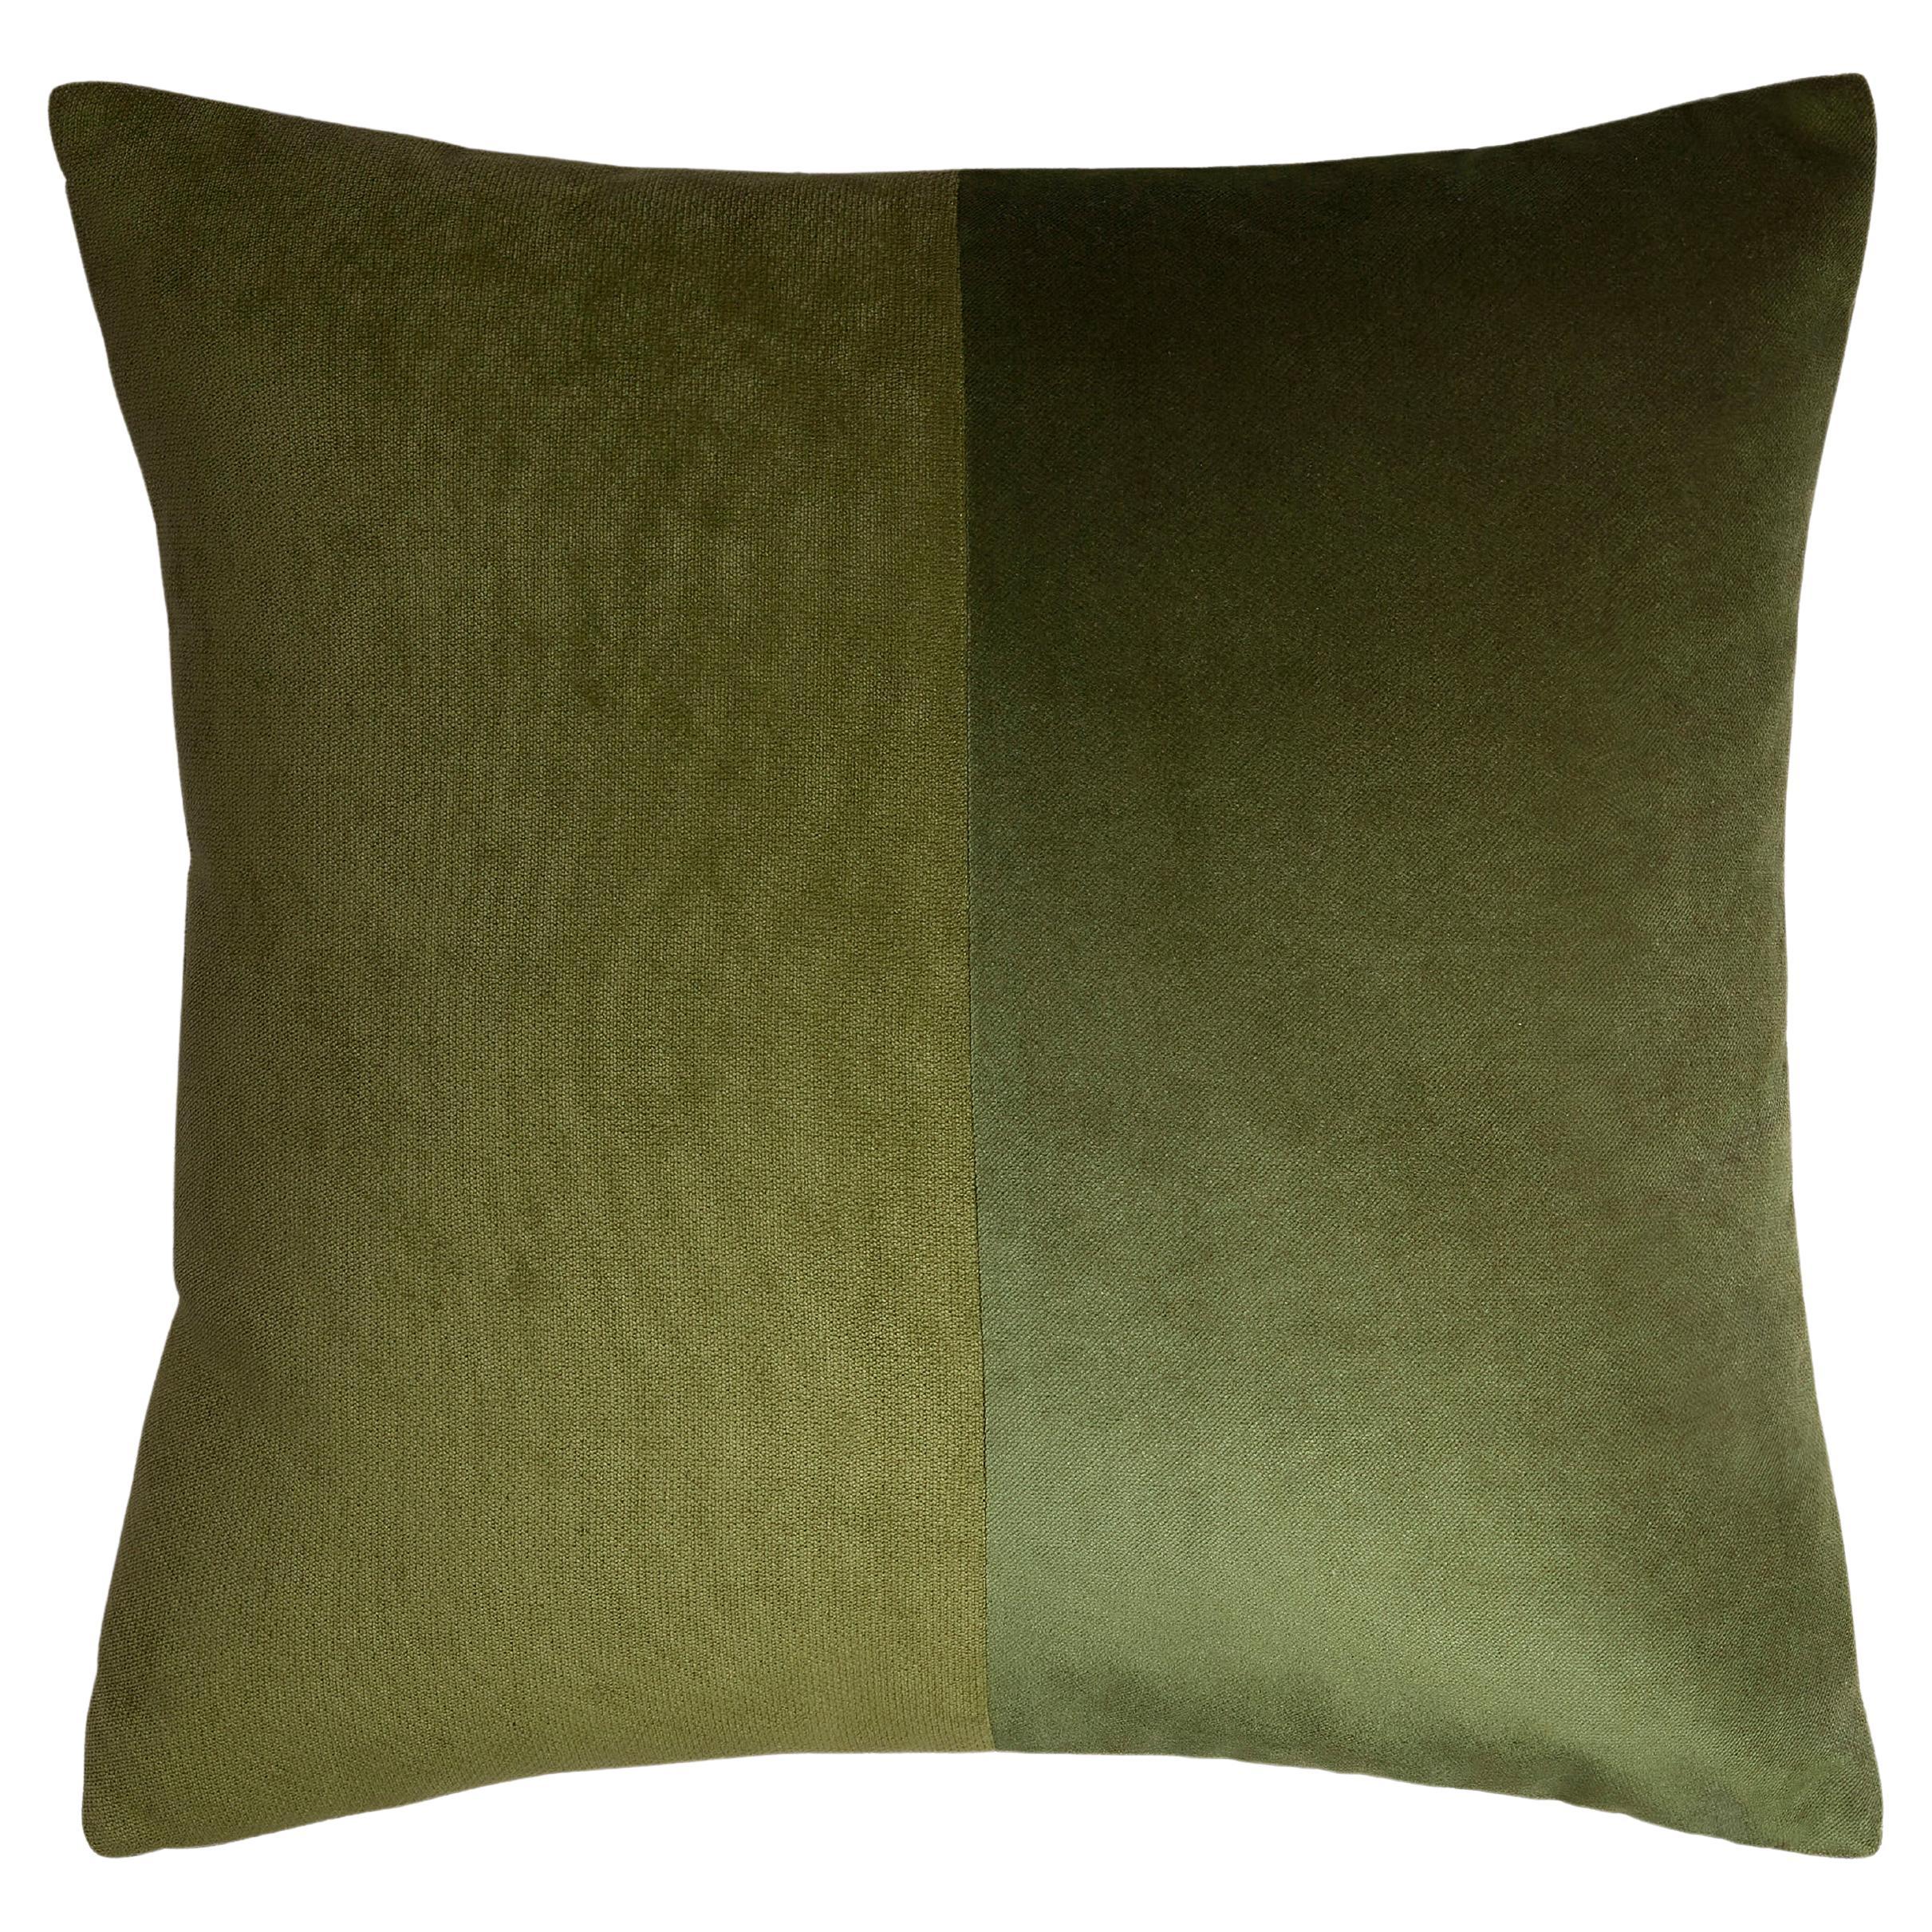 Double Green Cushion For Sale